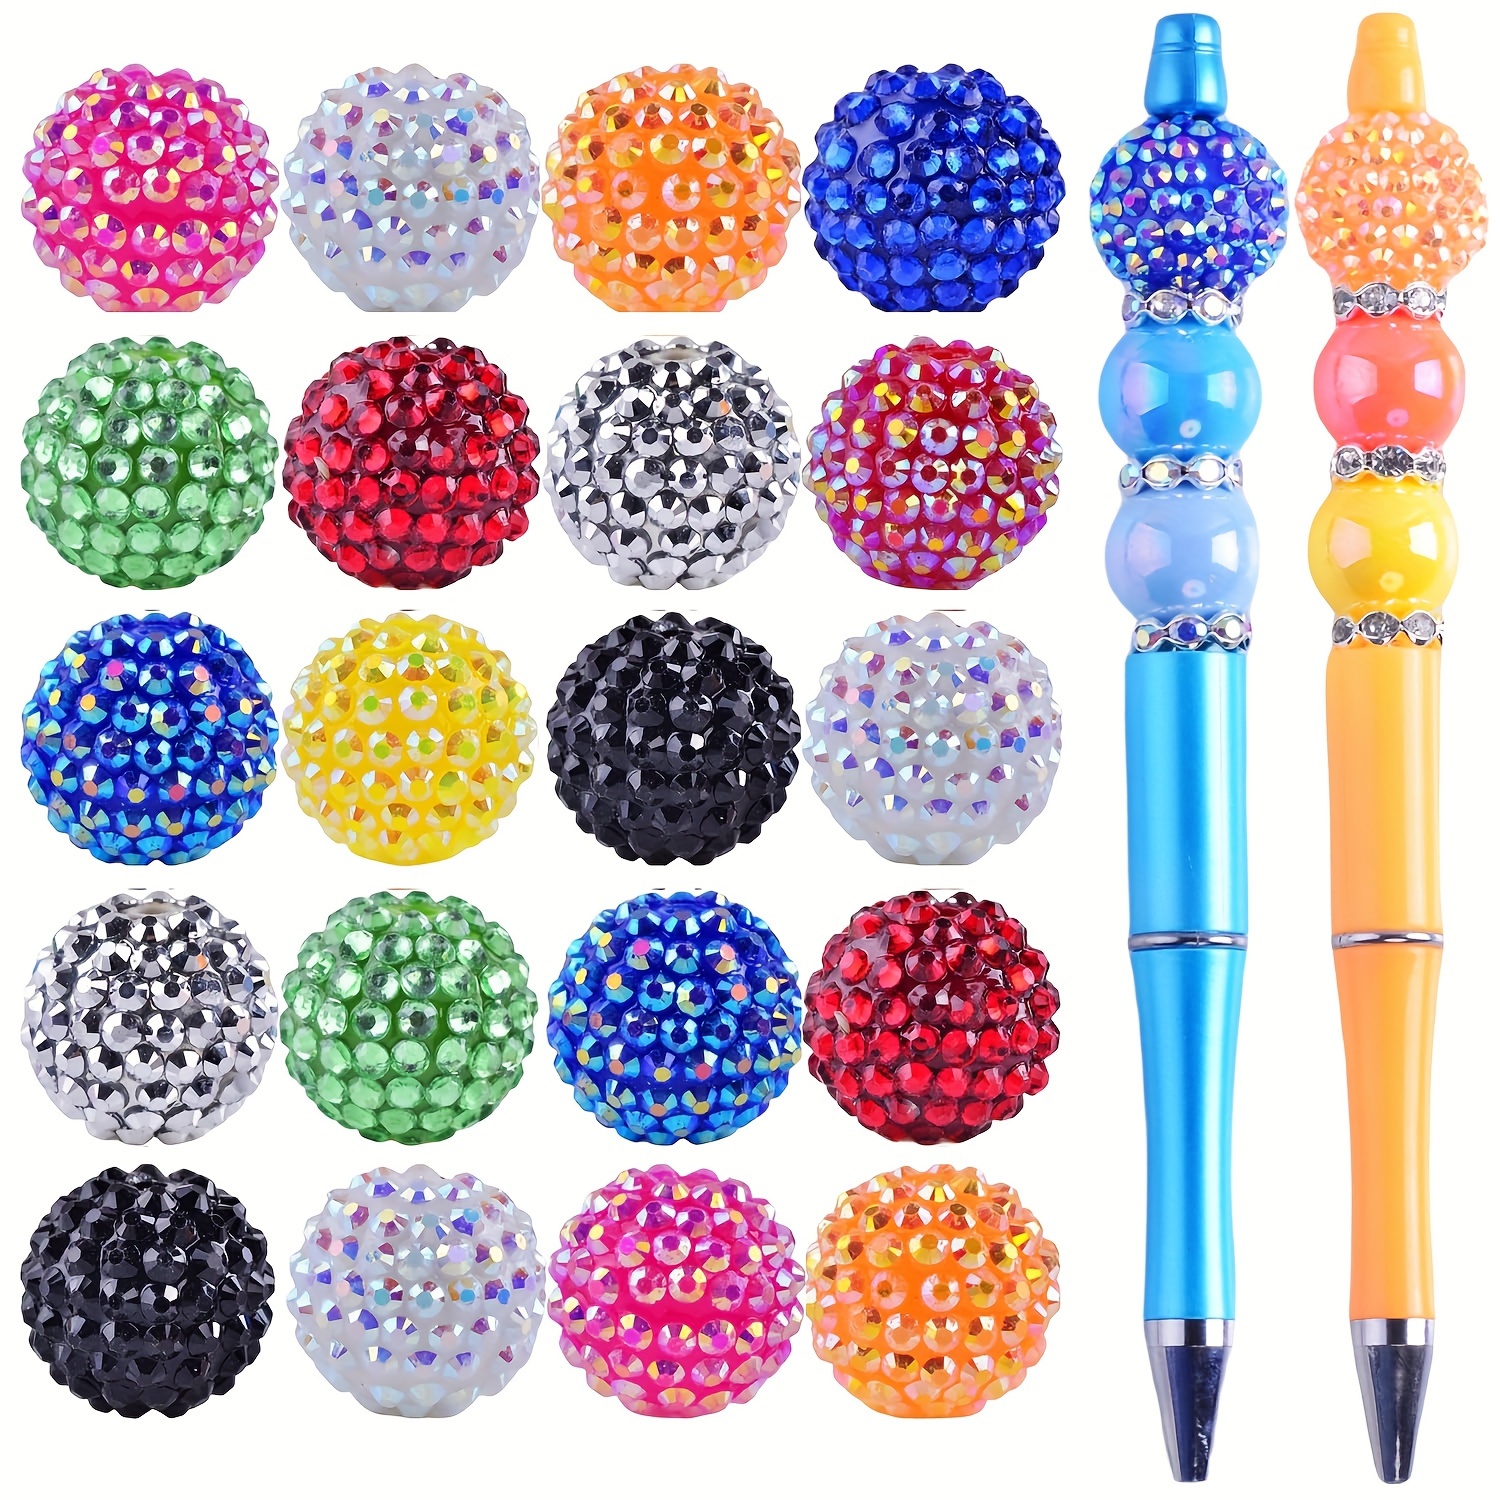 

20pcs 20mm Large Spacer Beads For Pens, Fancy Beads For Beadable Pens Candy Crack Ball Beads Bulk For Bag Bracelet Jewelry